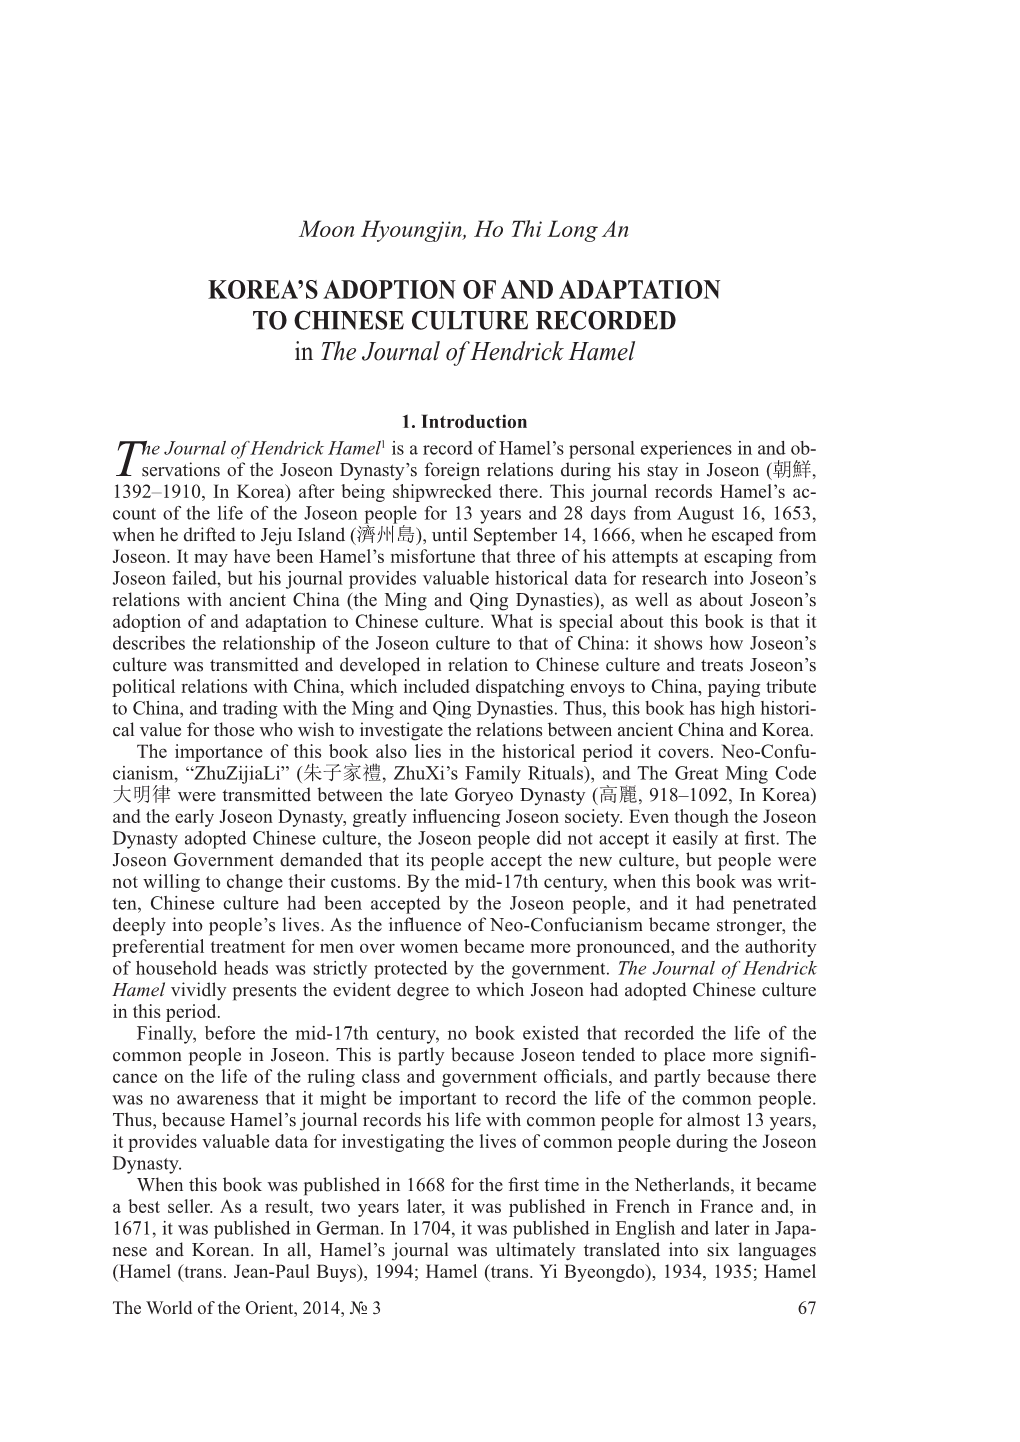 KOREA's ADOPTION of and ADAPTATION to CHINESE CULTURE RECORDED in the Journal of Hendrick Hamel